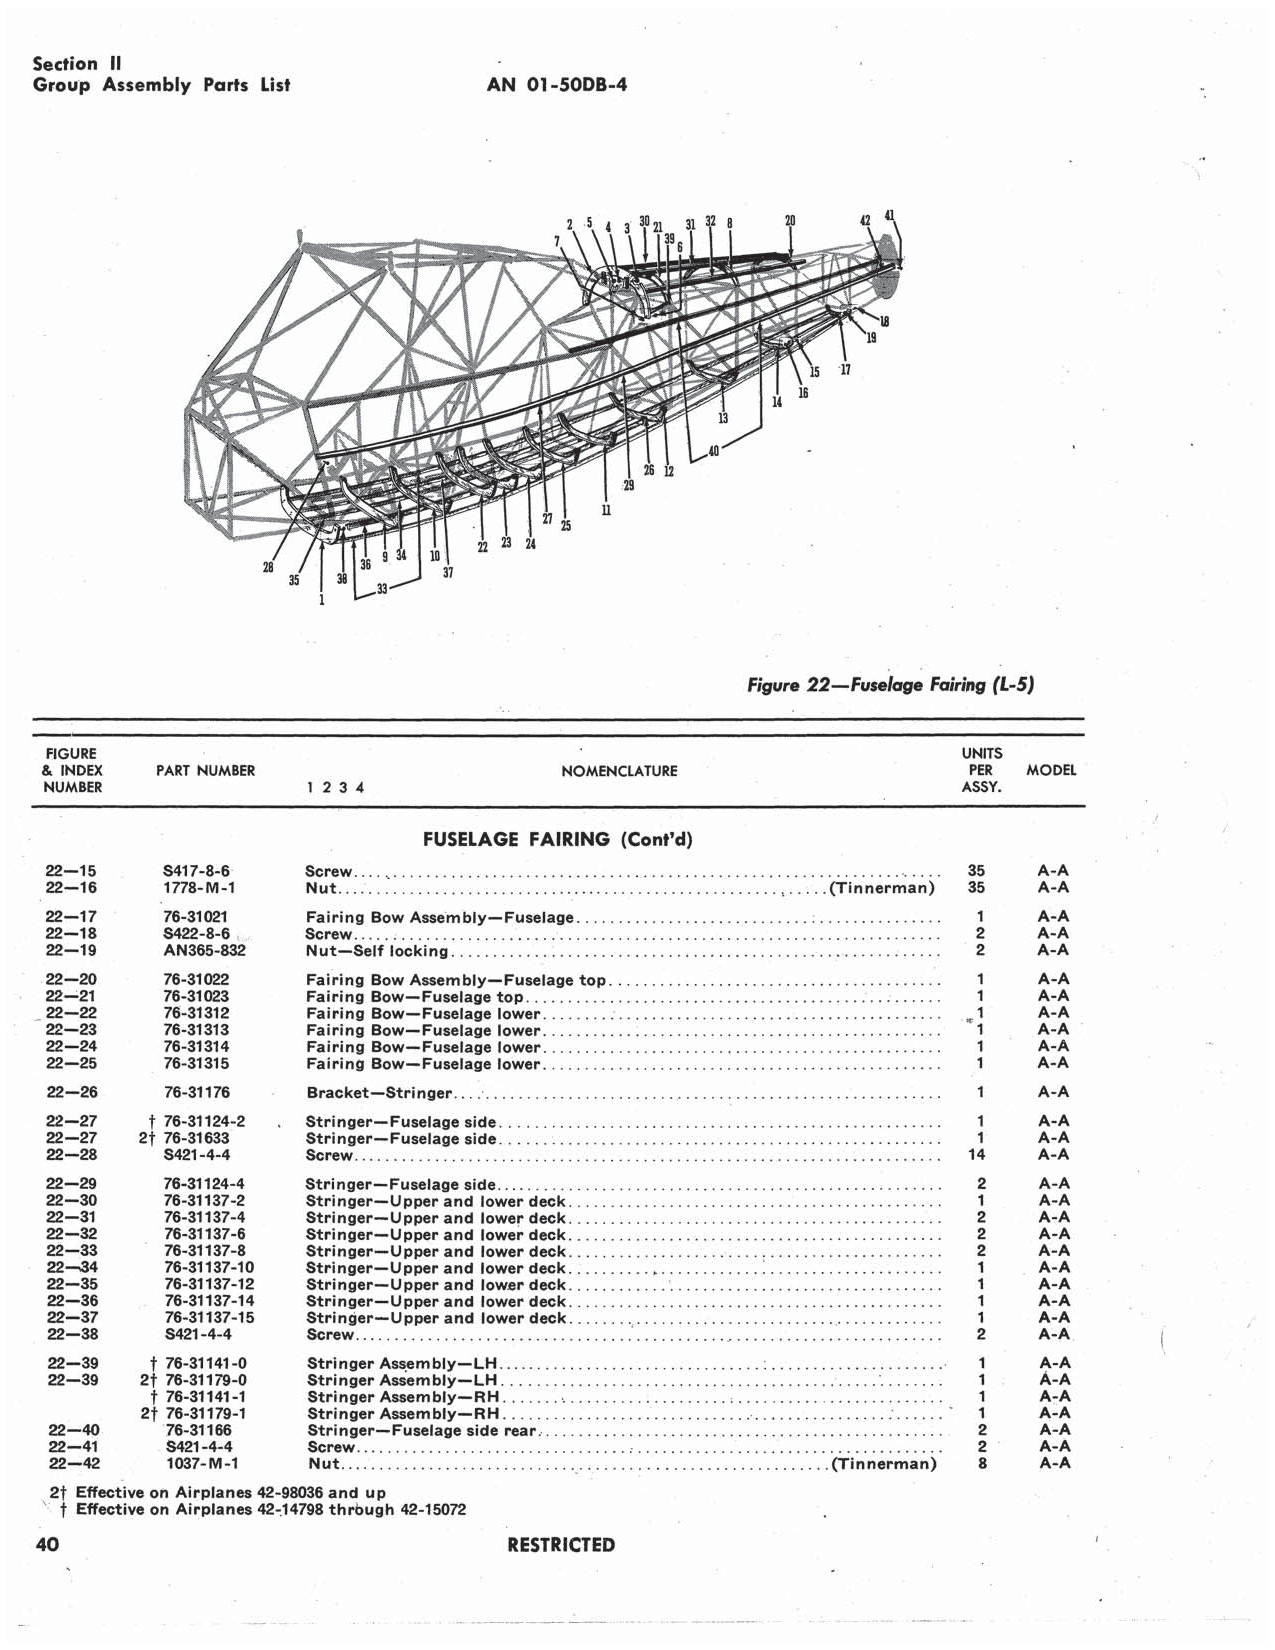 Sample page 44 from AirCorps Library document: Illustrated Parts Breakdown - L-5, OY-1, OY-2